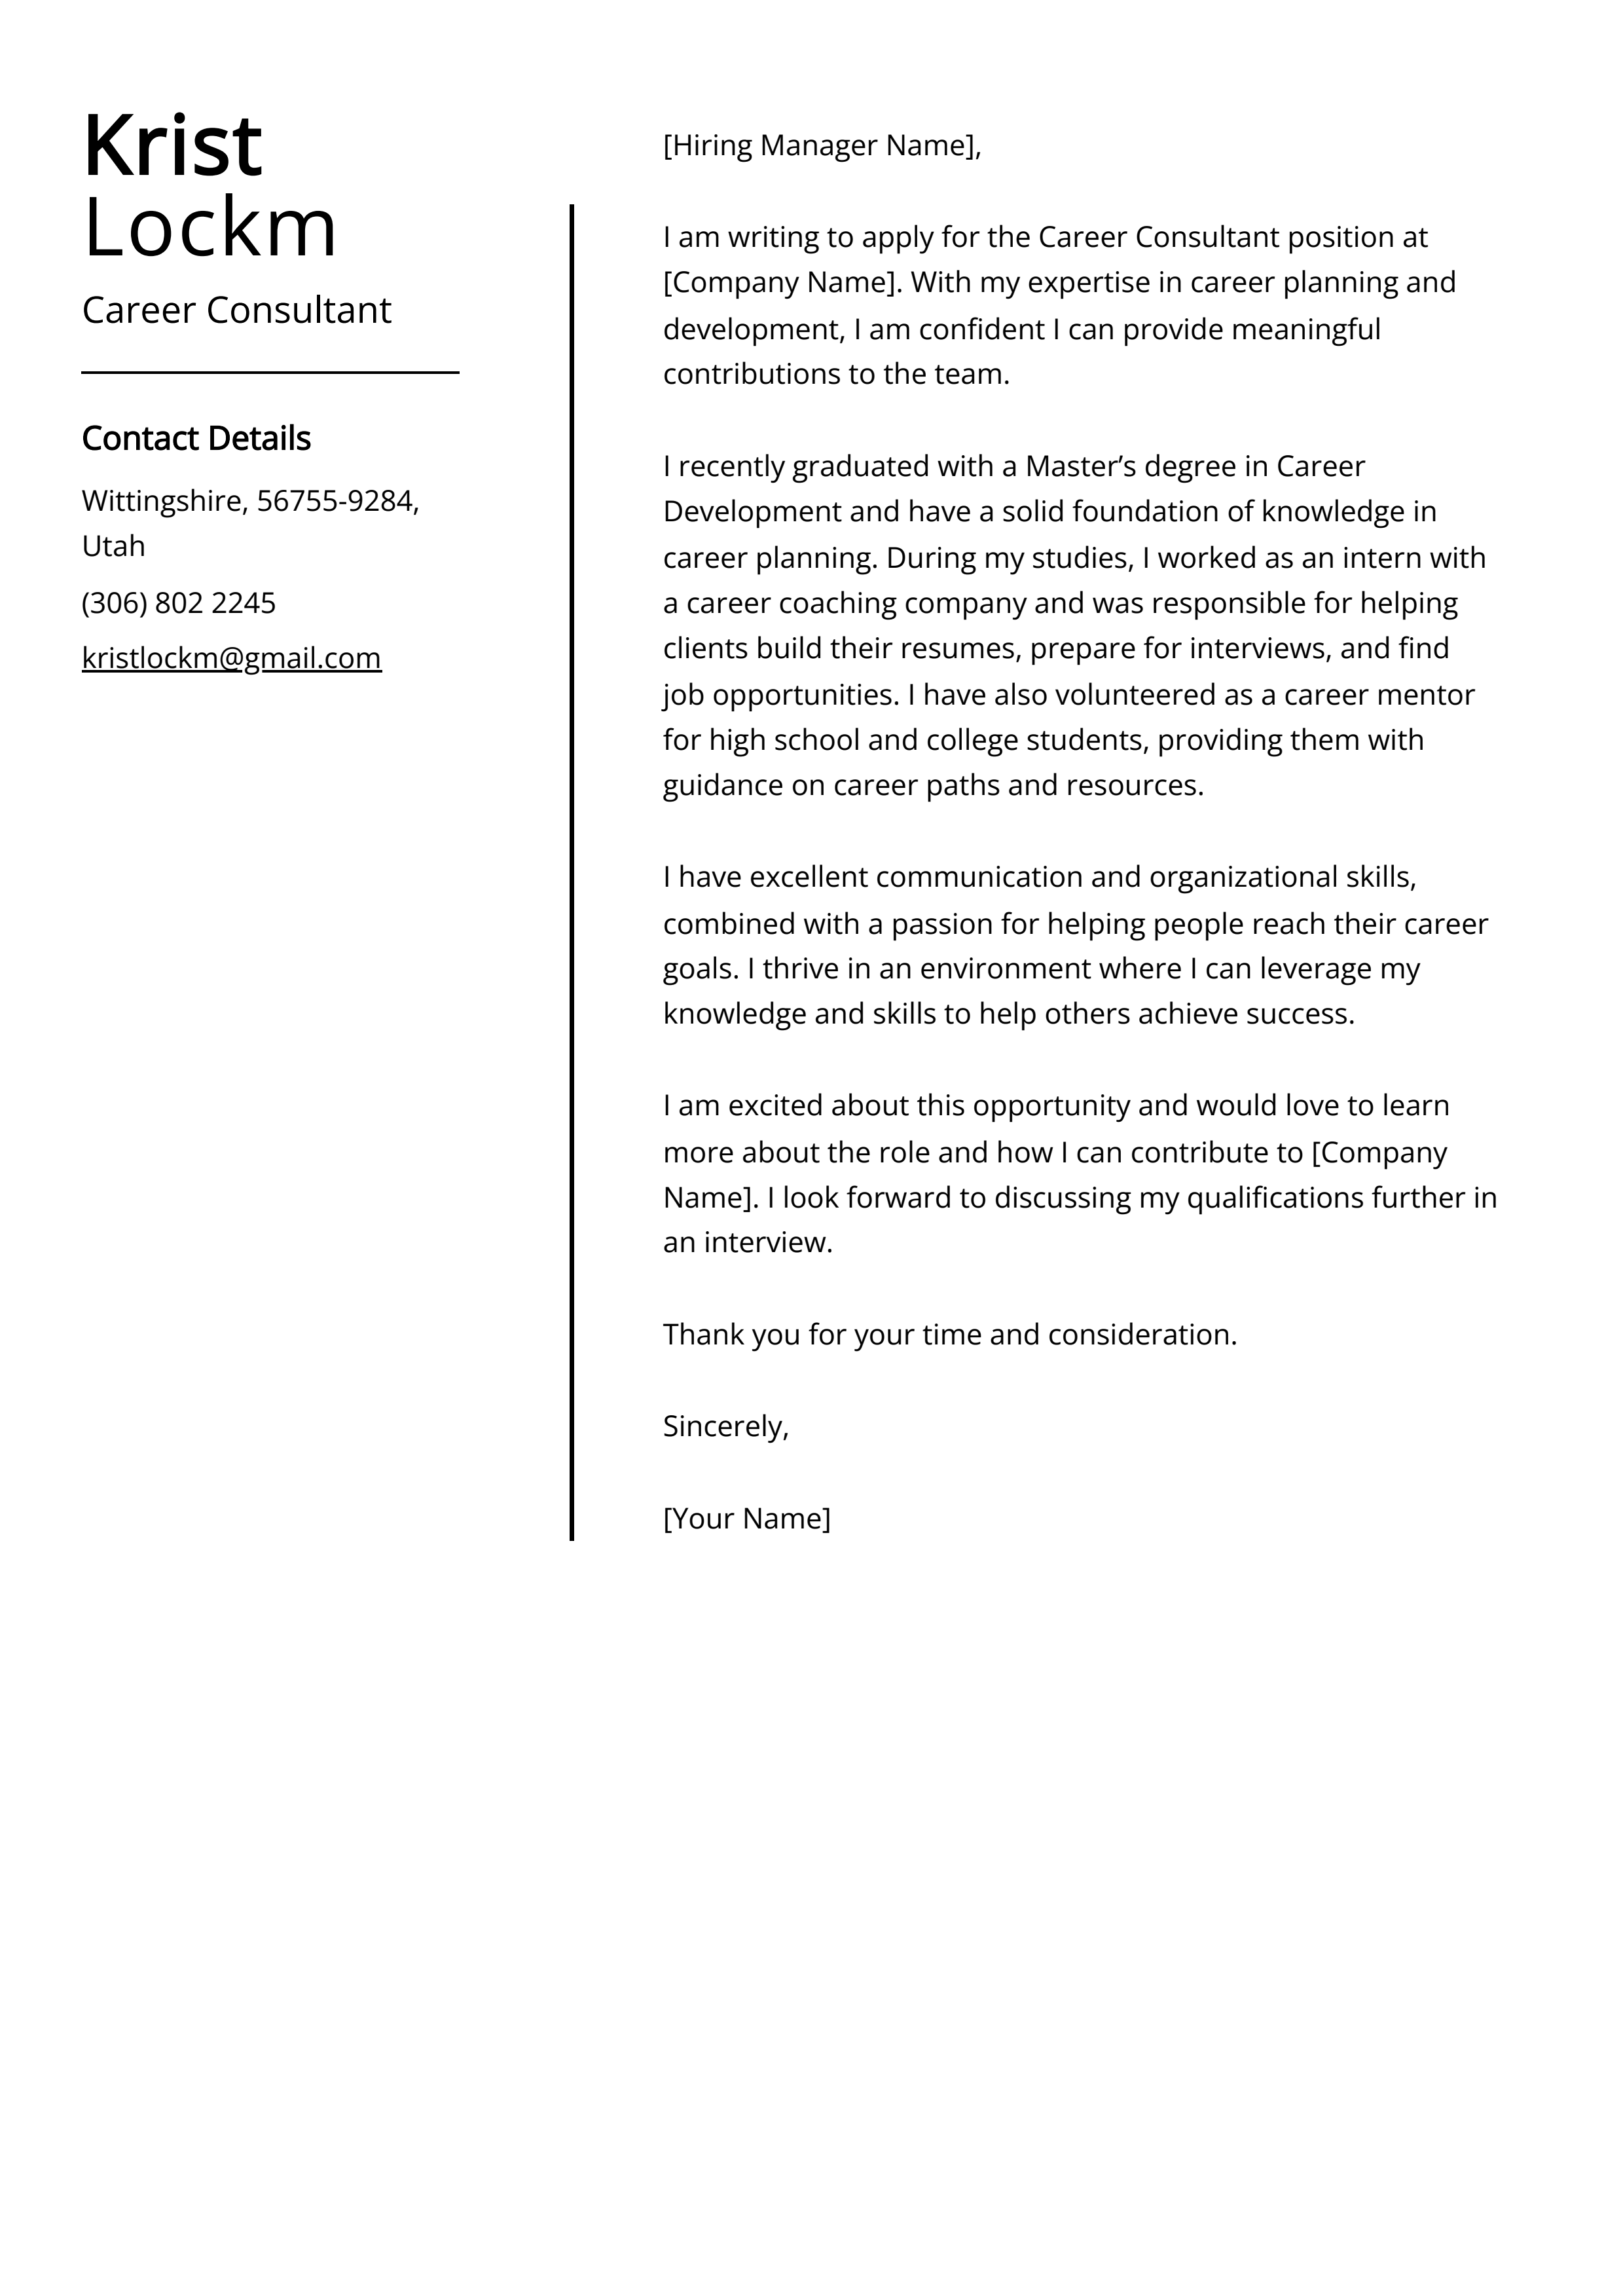 Career Consultant Cover Letter Example